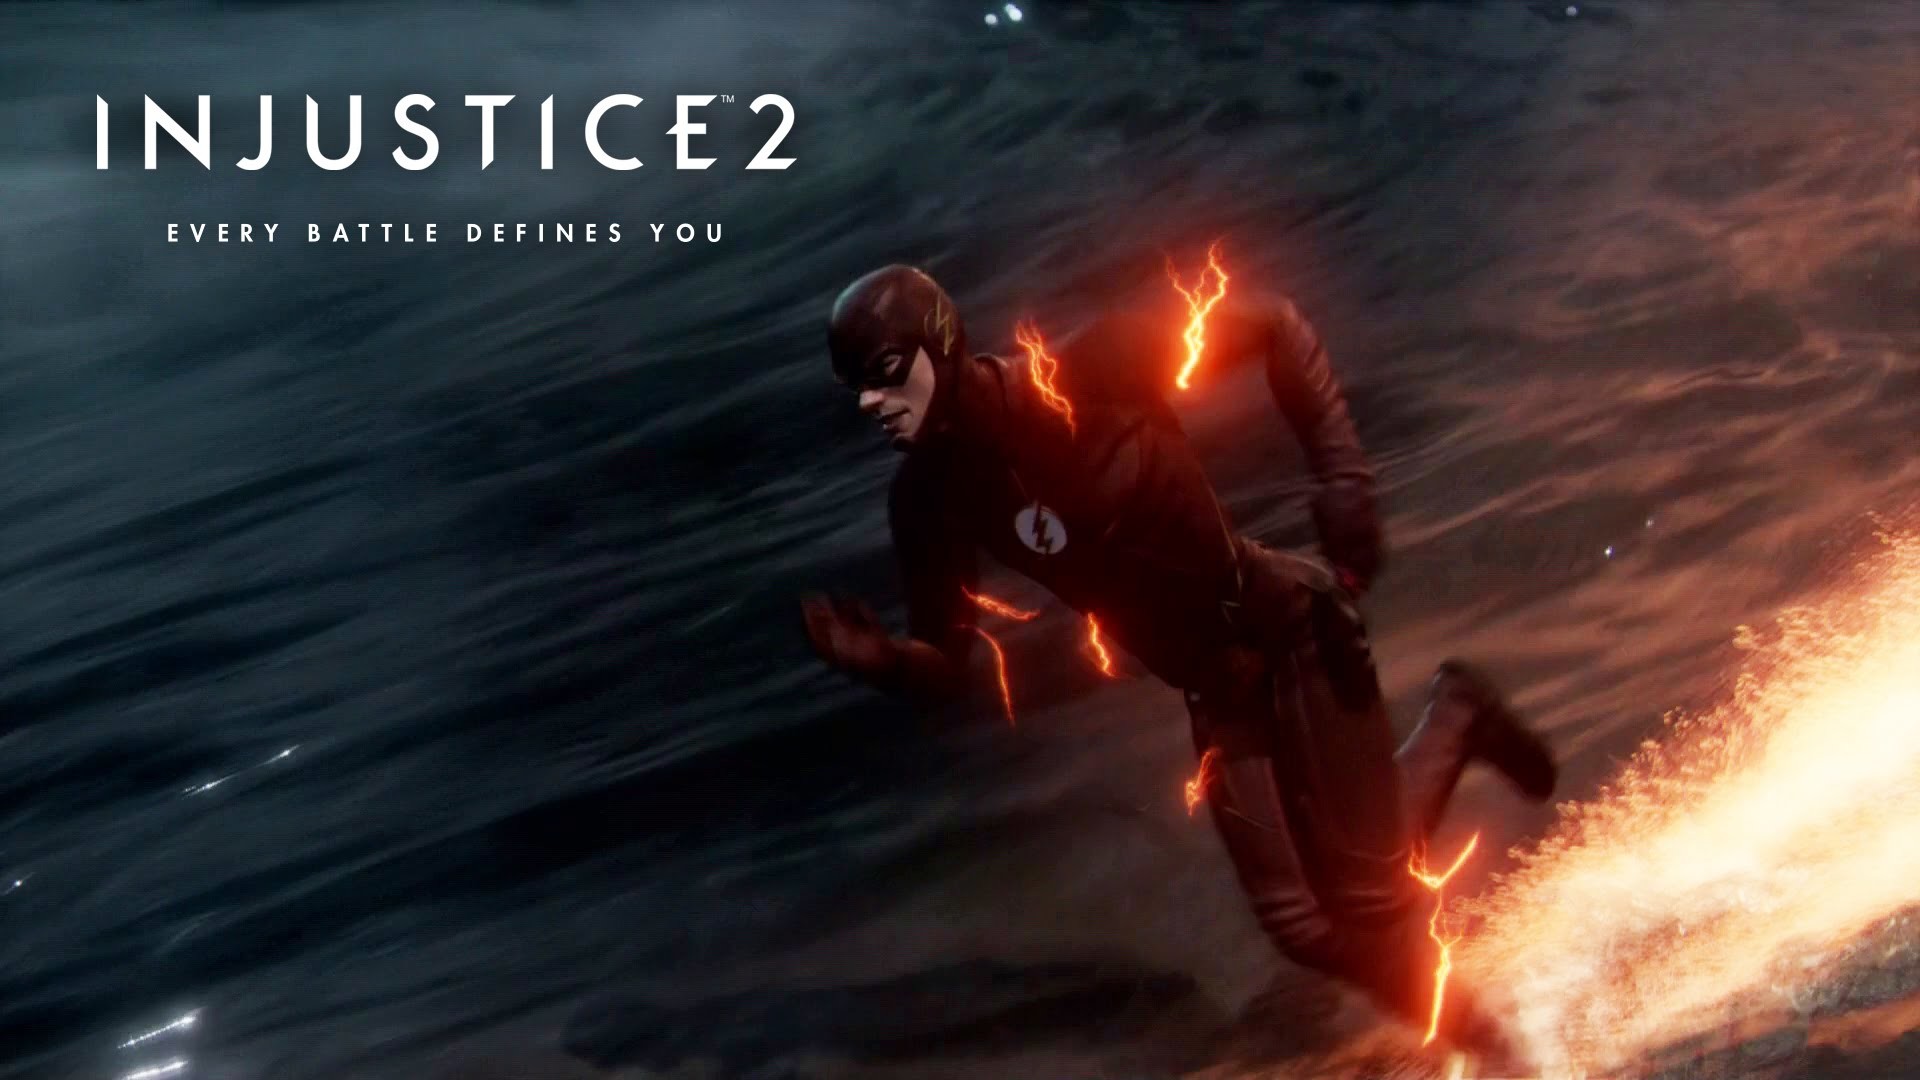 Injustice 2 The Flash CW Suit Zoom in Injustice 2